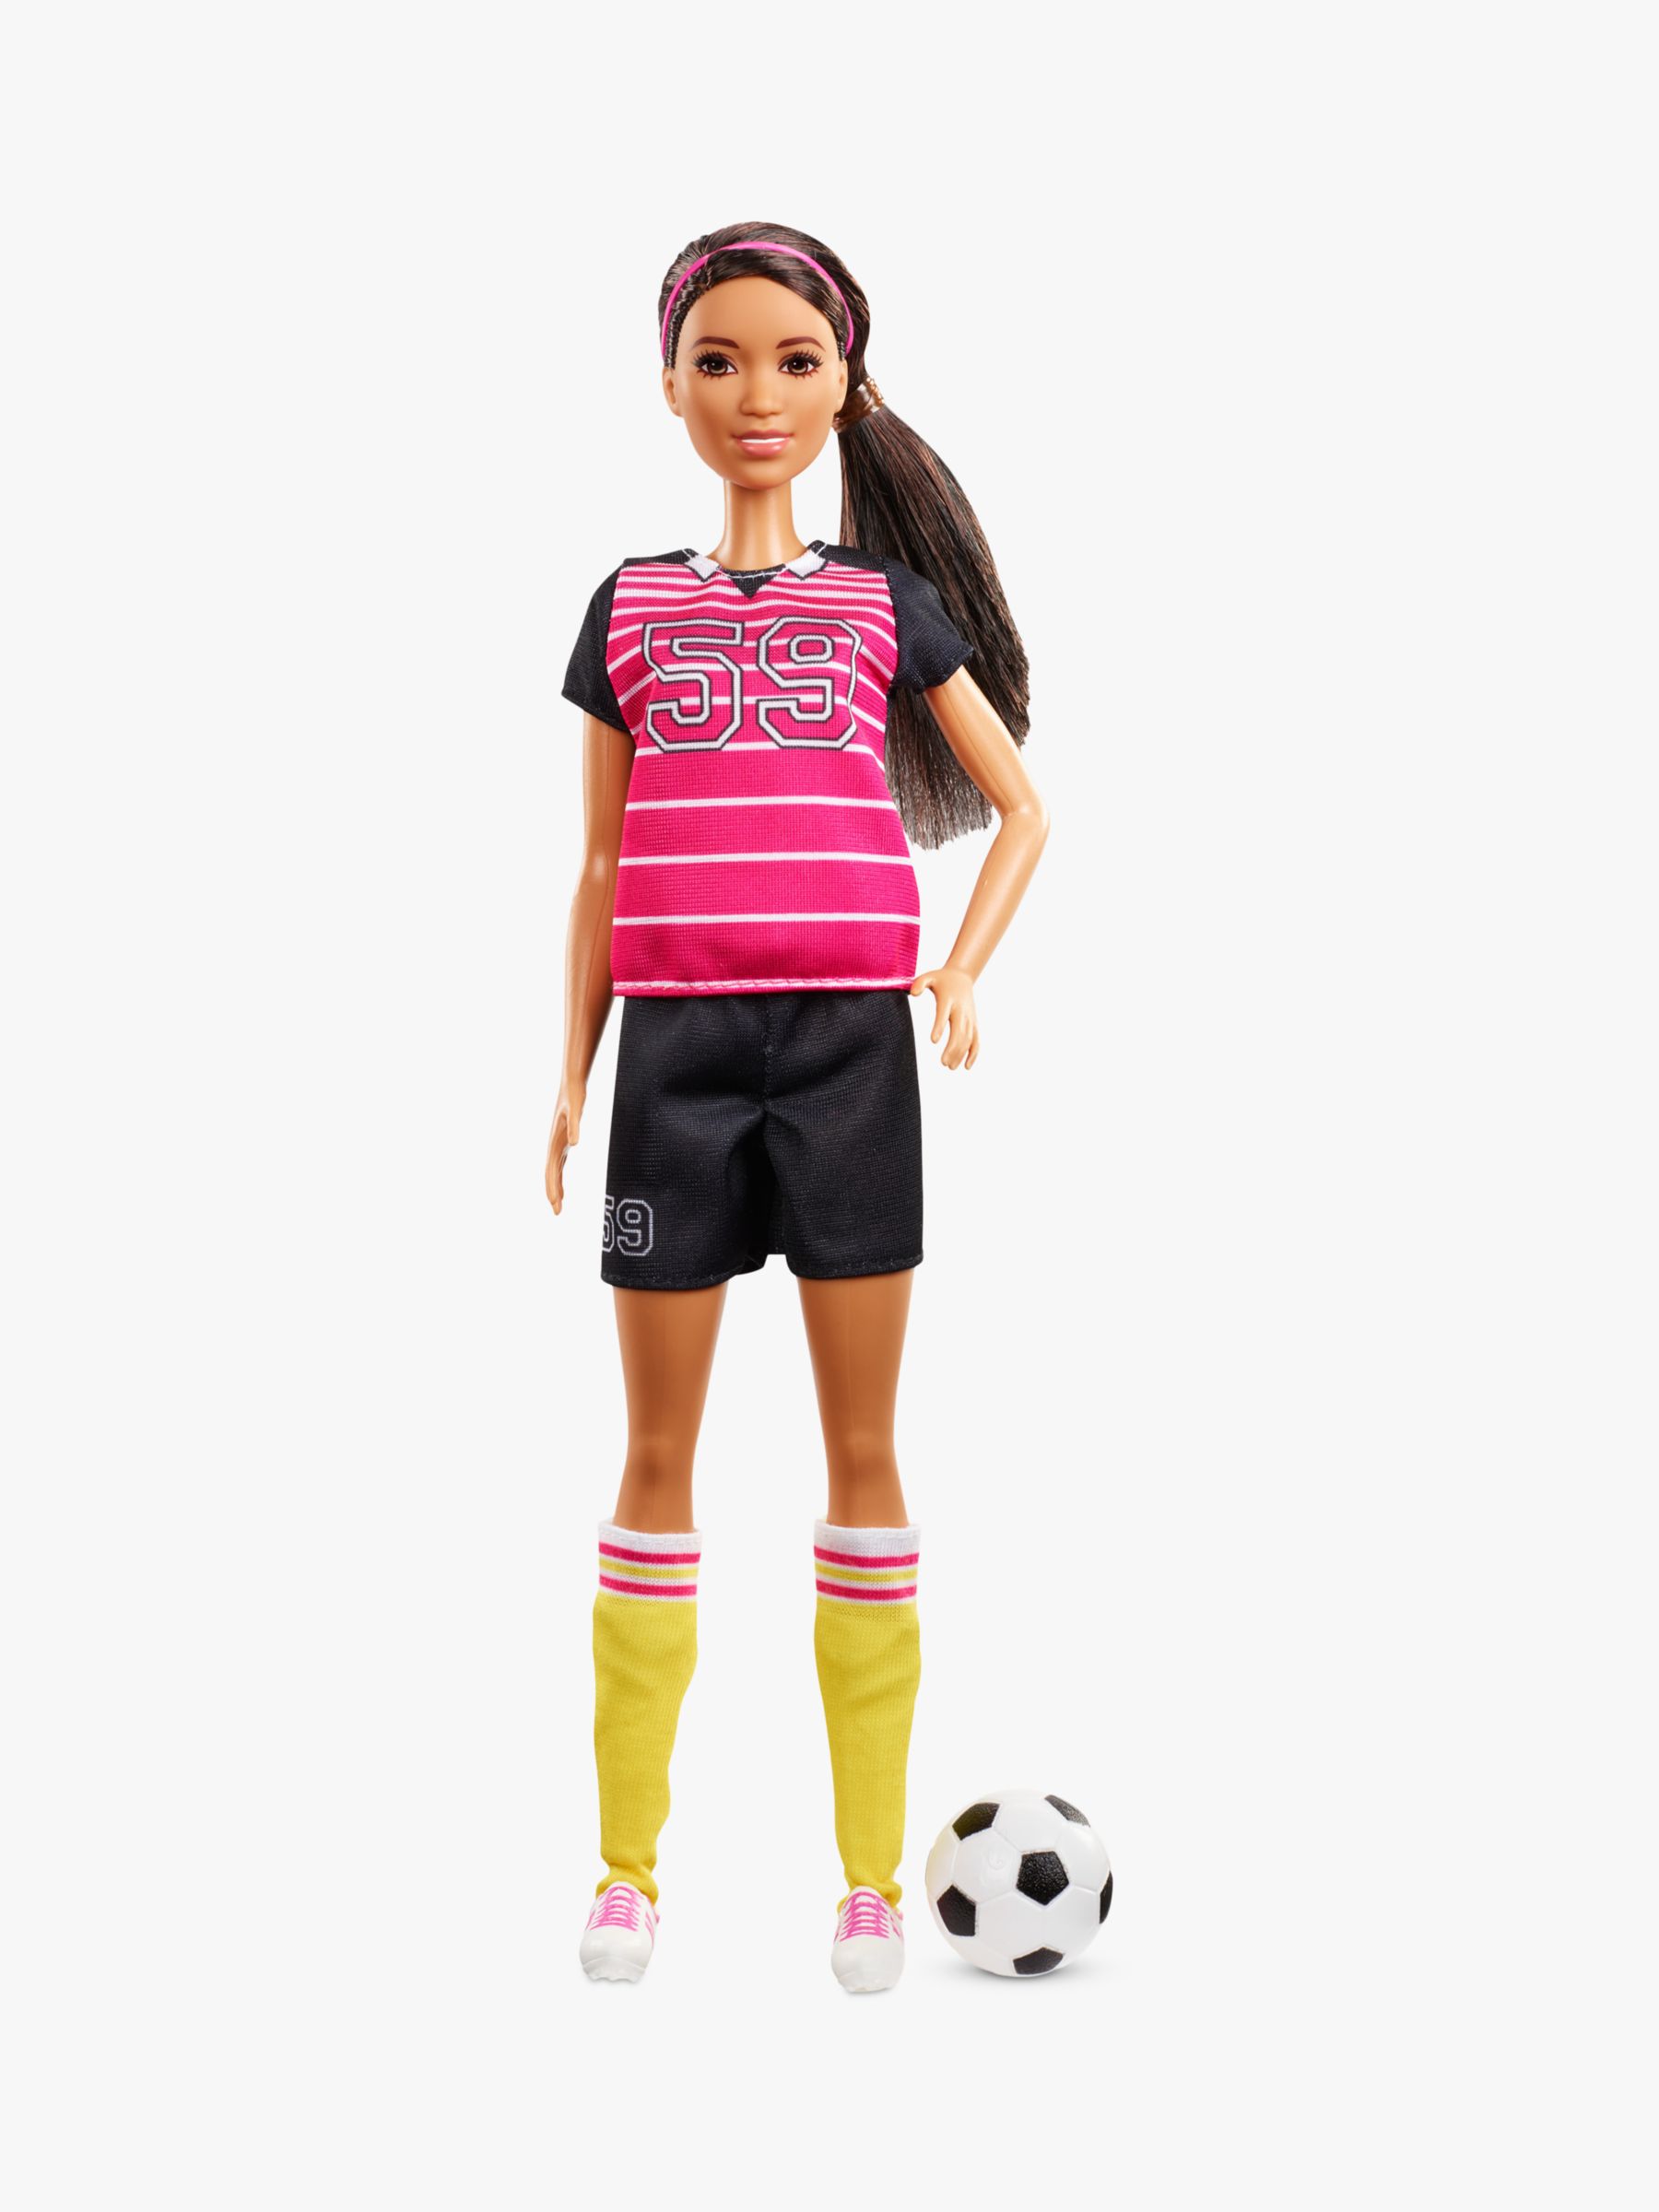 Barbie I Can Be a Footballer 60th  Anniversary  Career Doll 